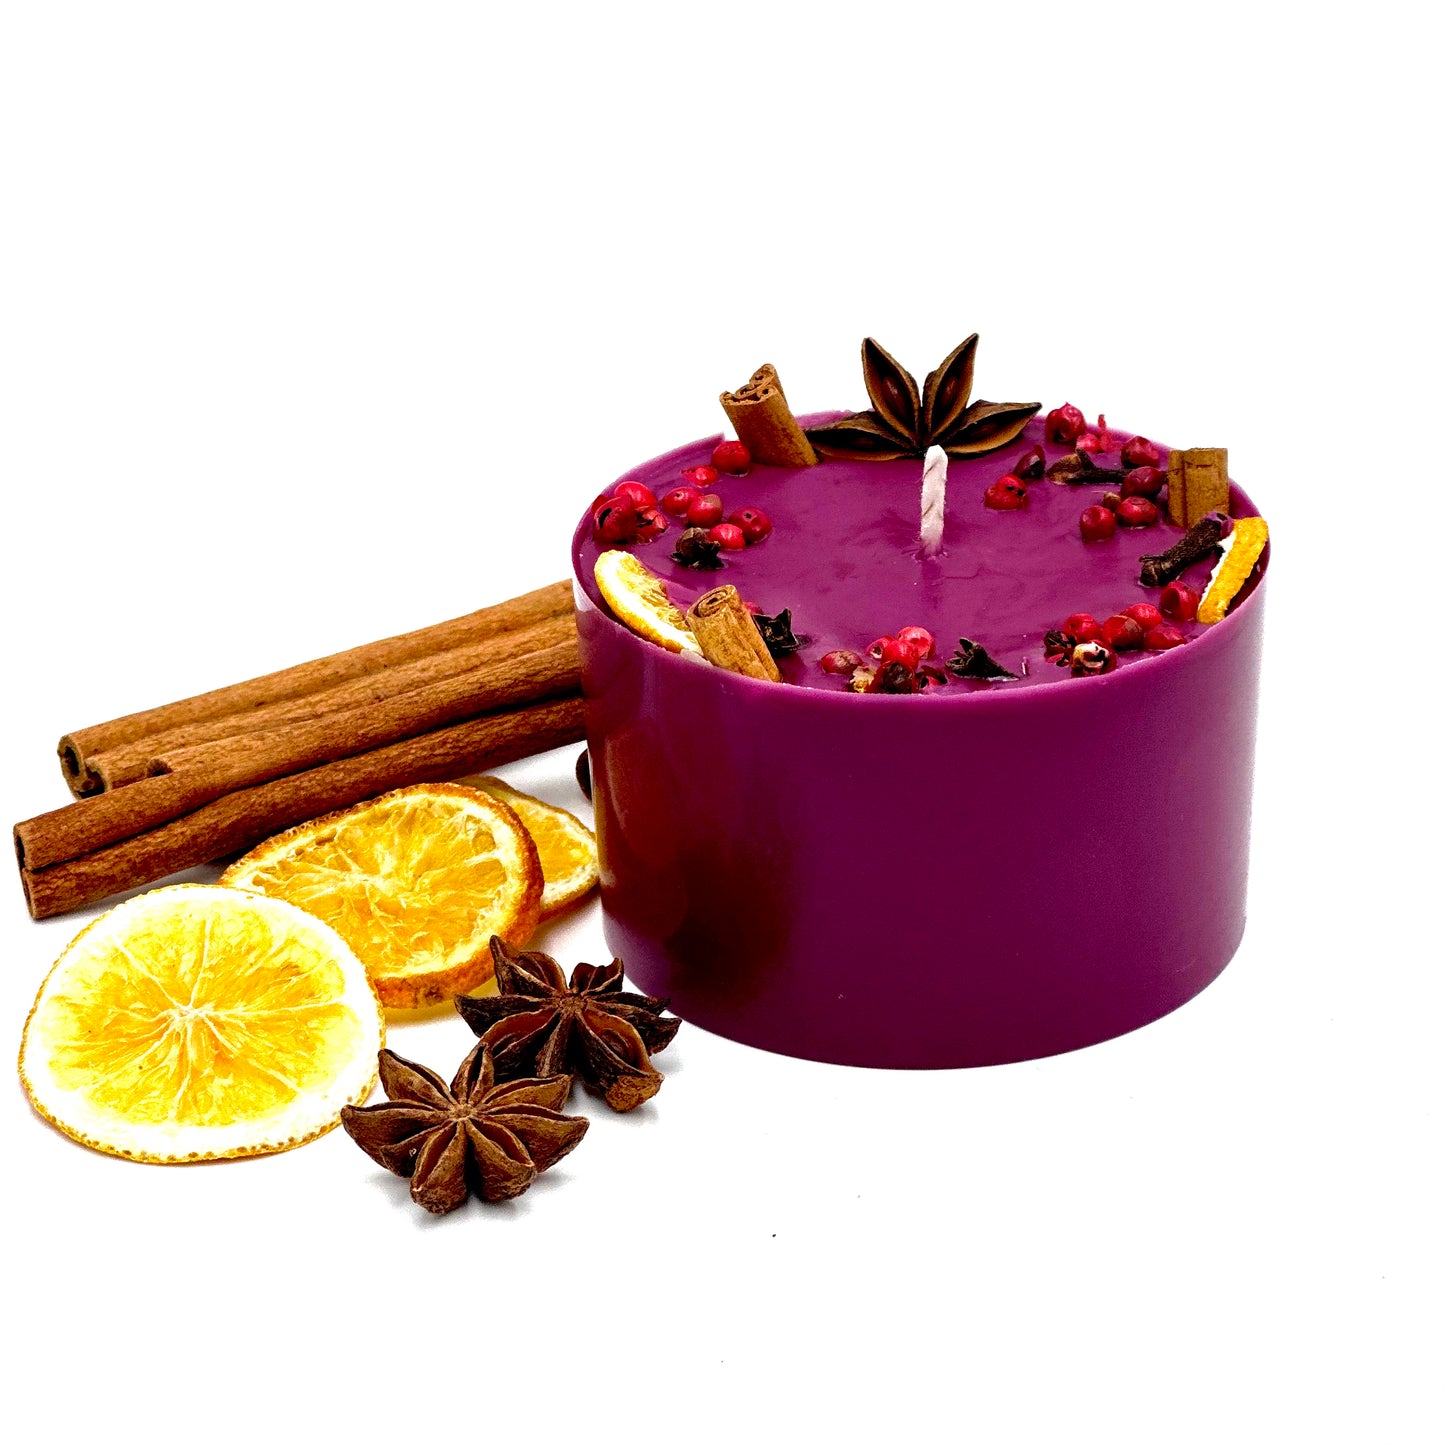 Natural soy wax candle with "MULLED WINE" scent, dominated by notes of grapes, cinnamon and nutmeg